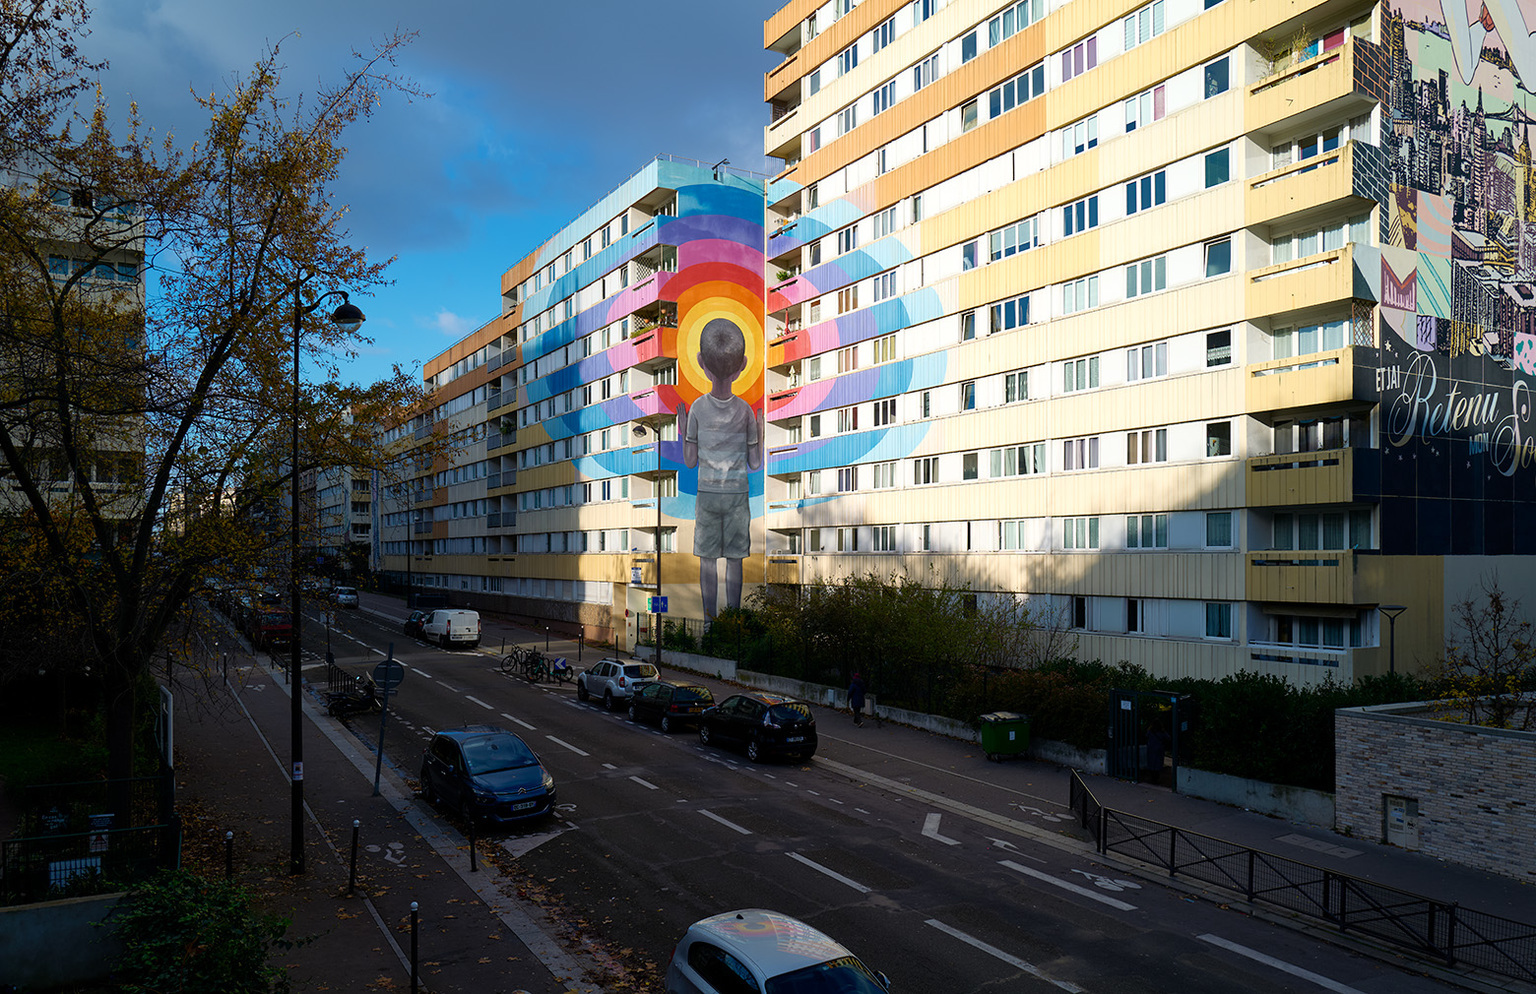 A mural by Seth called “enter the vortex” is seen in the 13th arr., Paris